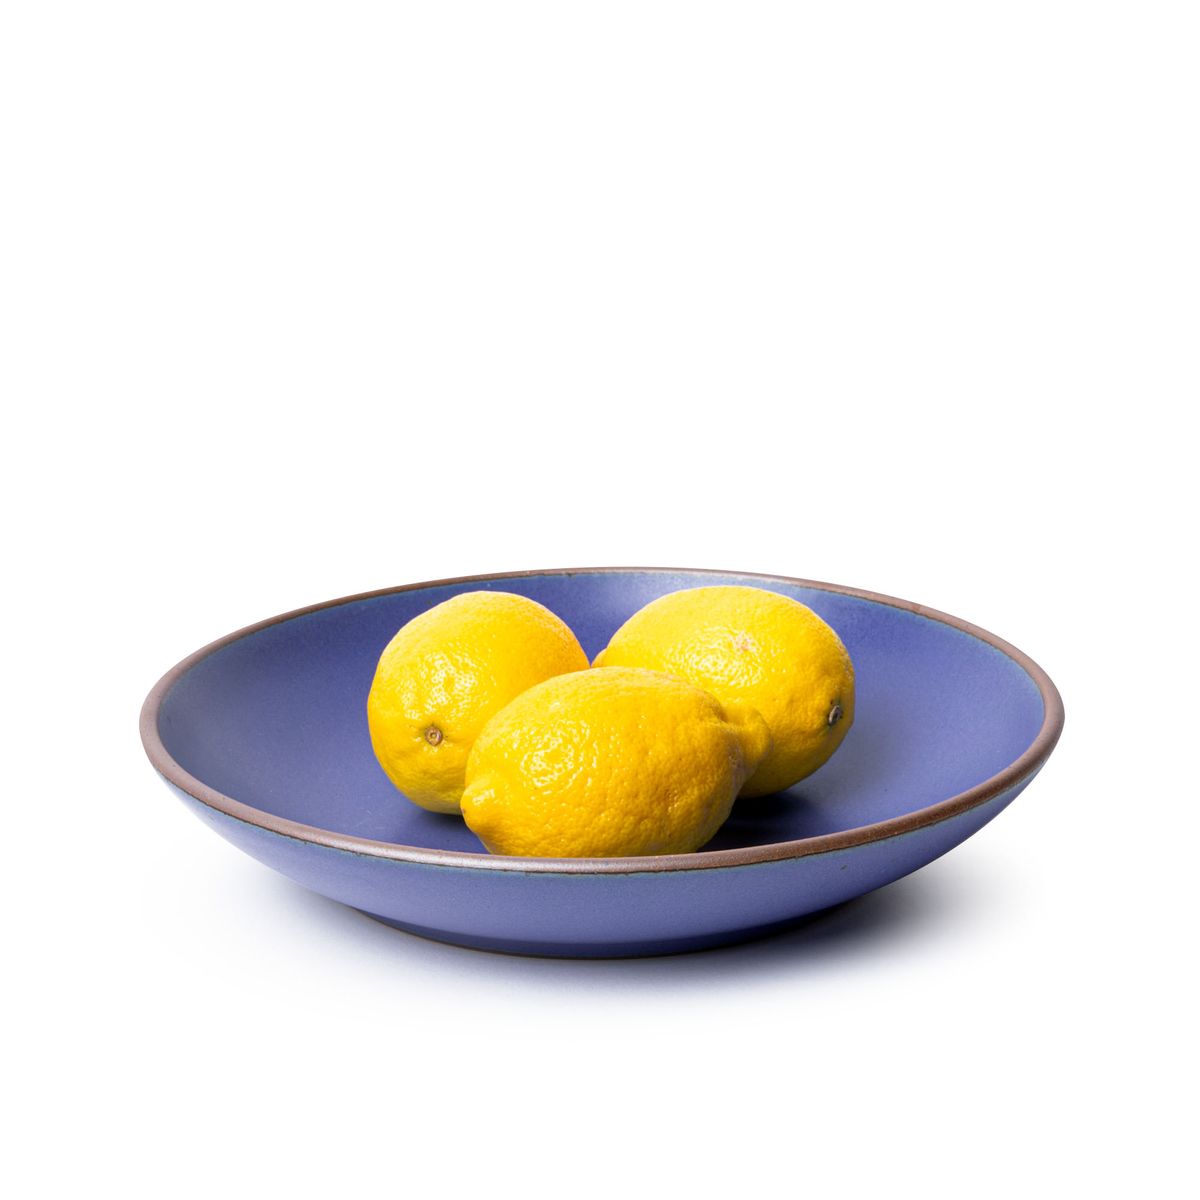 Three whole lemons on a large ceramic plate with a curved bowl edge in a true cool blue color featuring iron speckles and an unglazed rim.